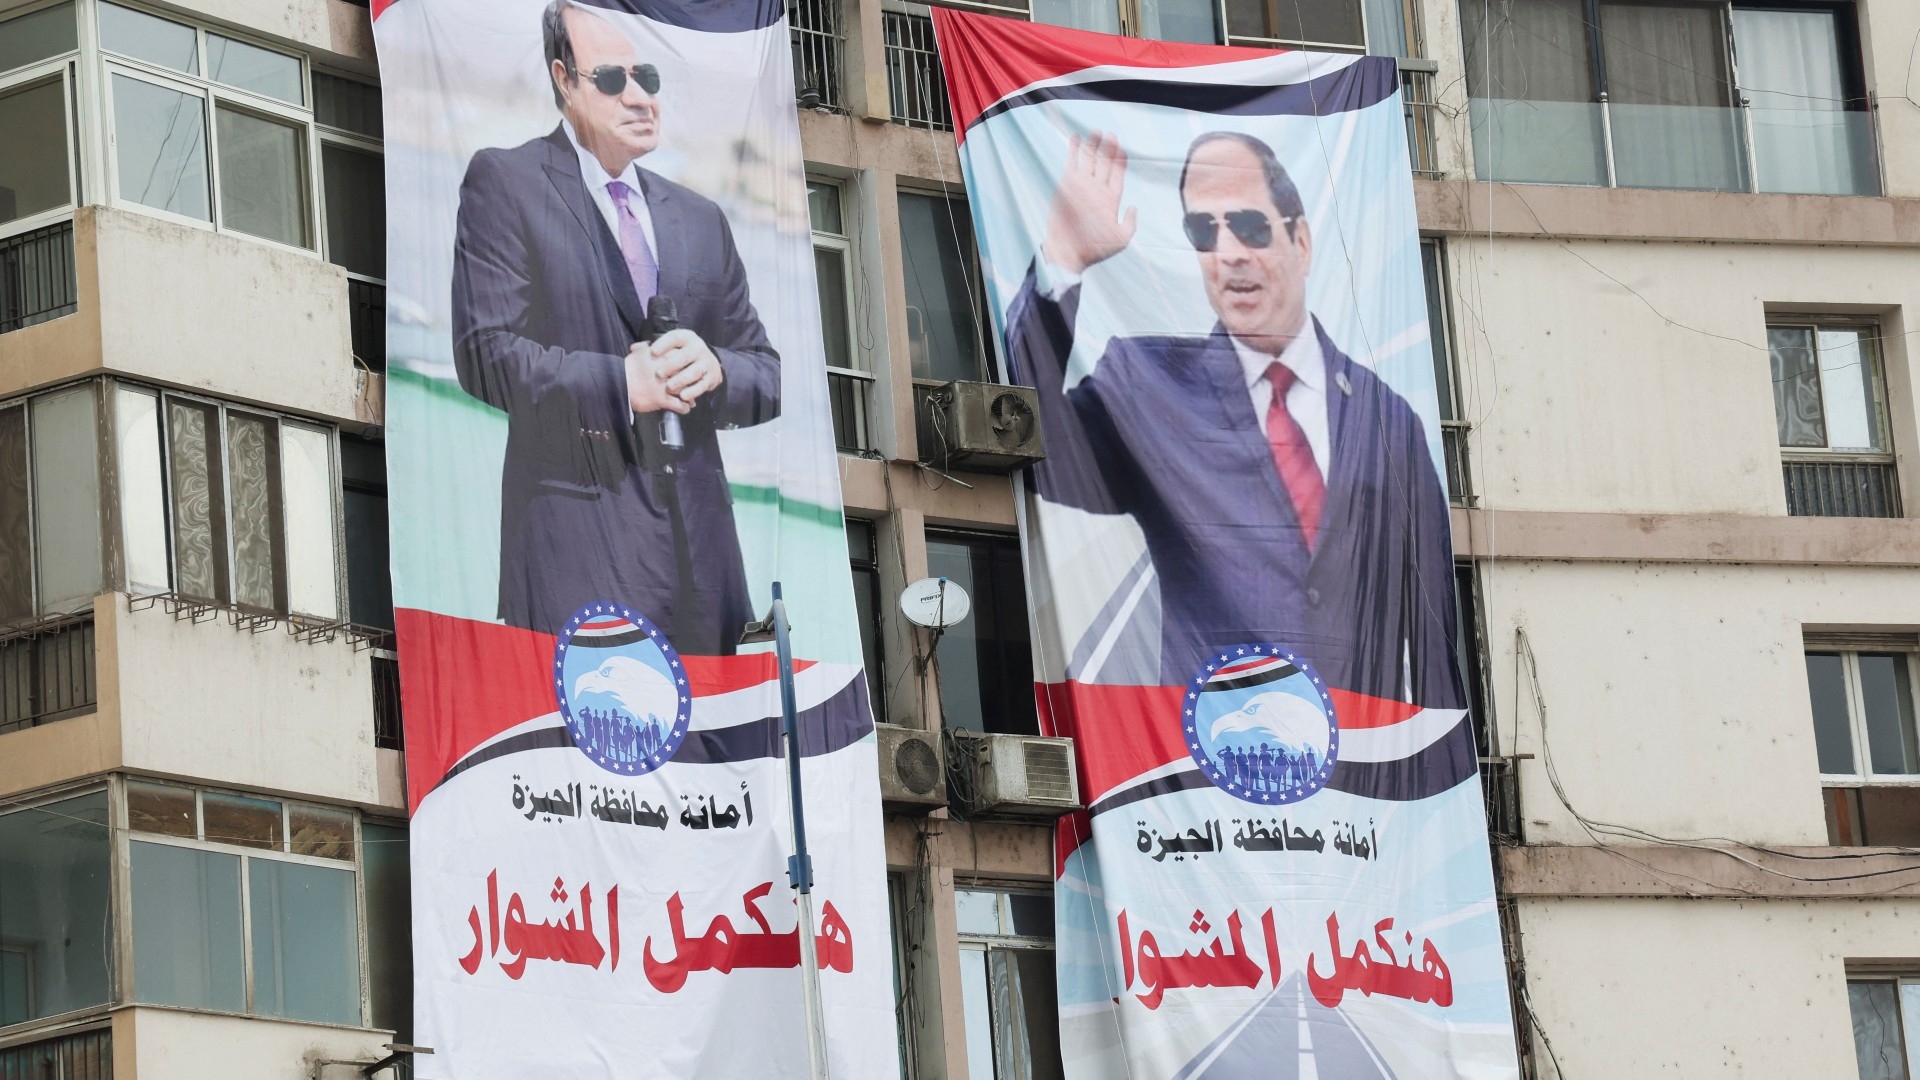 Posters of President Sisi supporting his candidacy in the presidential elections in December, at Al Galaa Square in the Dokki district of Giza, Egypt, 2 October 2023